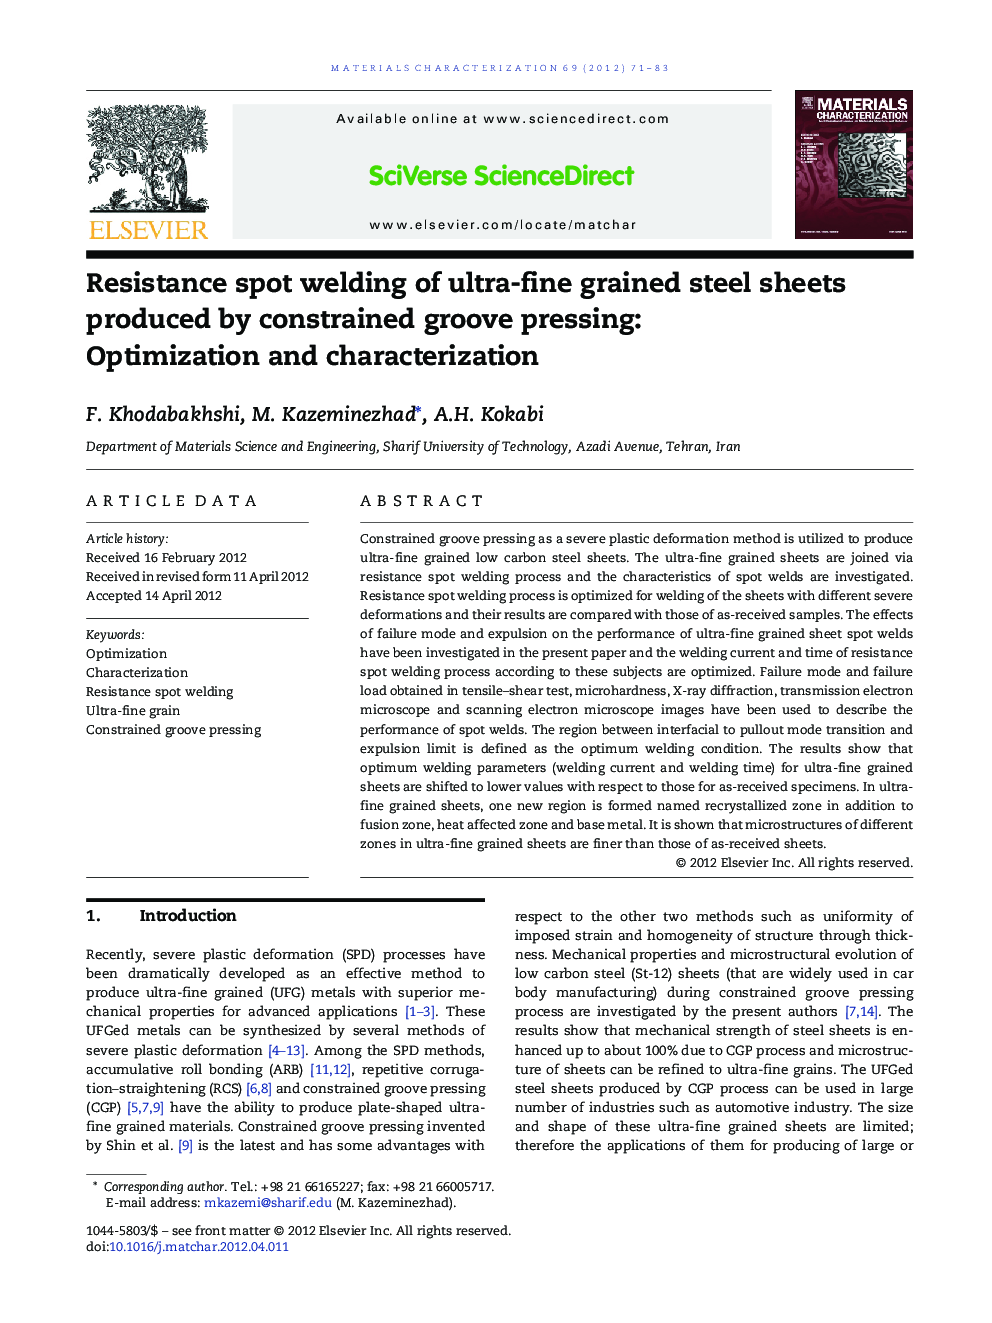 Resistance spot welding of ultra-fine grained steel sheets produced by constrained groove pressing: Optimization and characterization